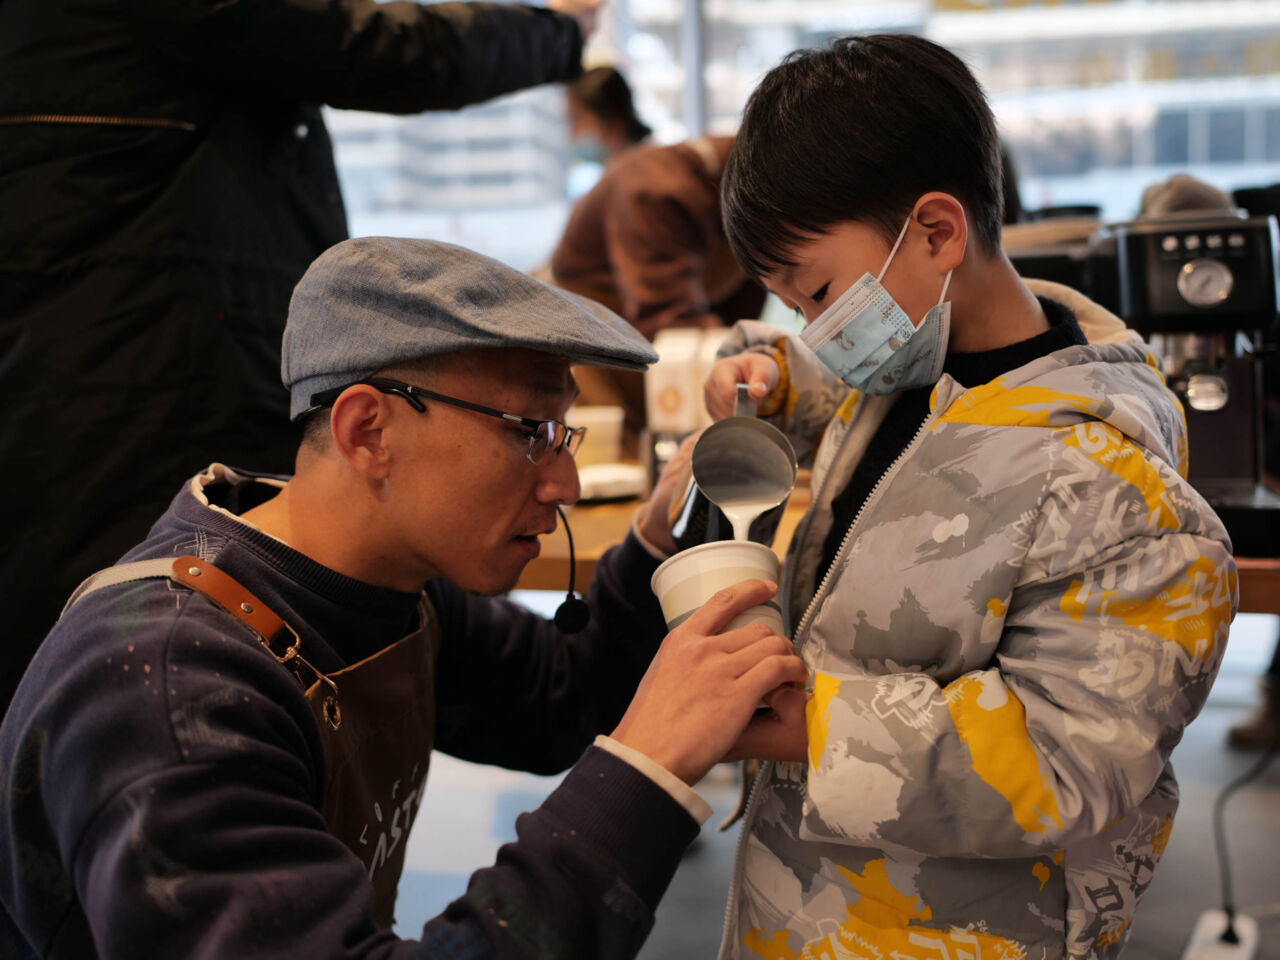 A father helps his son make coffee as part of the 2024 Spring Festival Skills Carnival at the WorldSkills Museum.